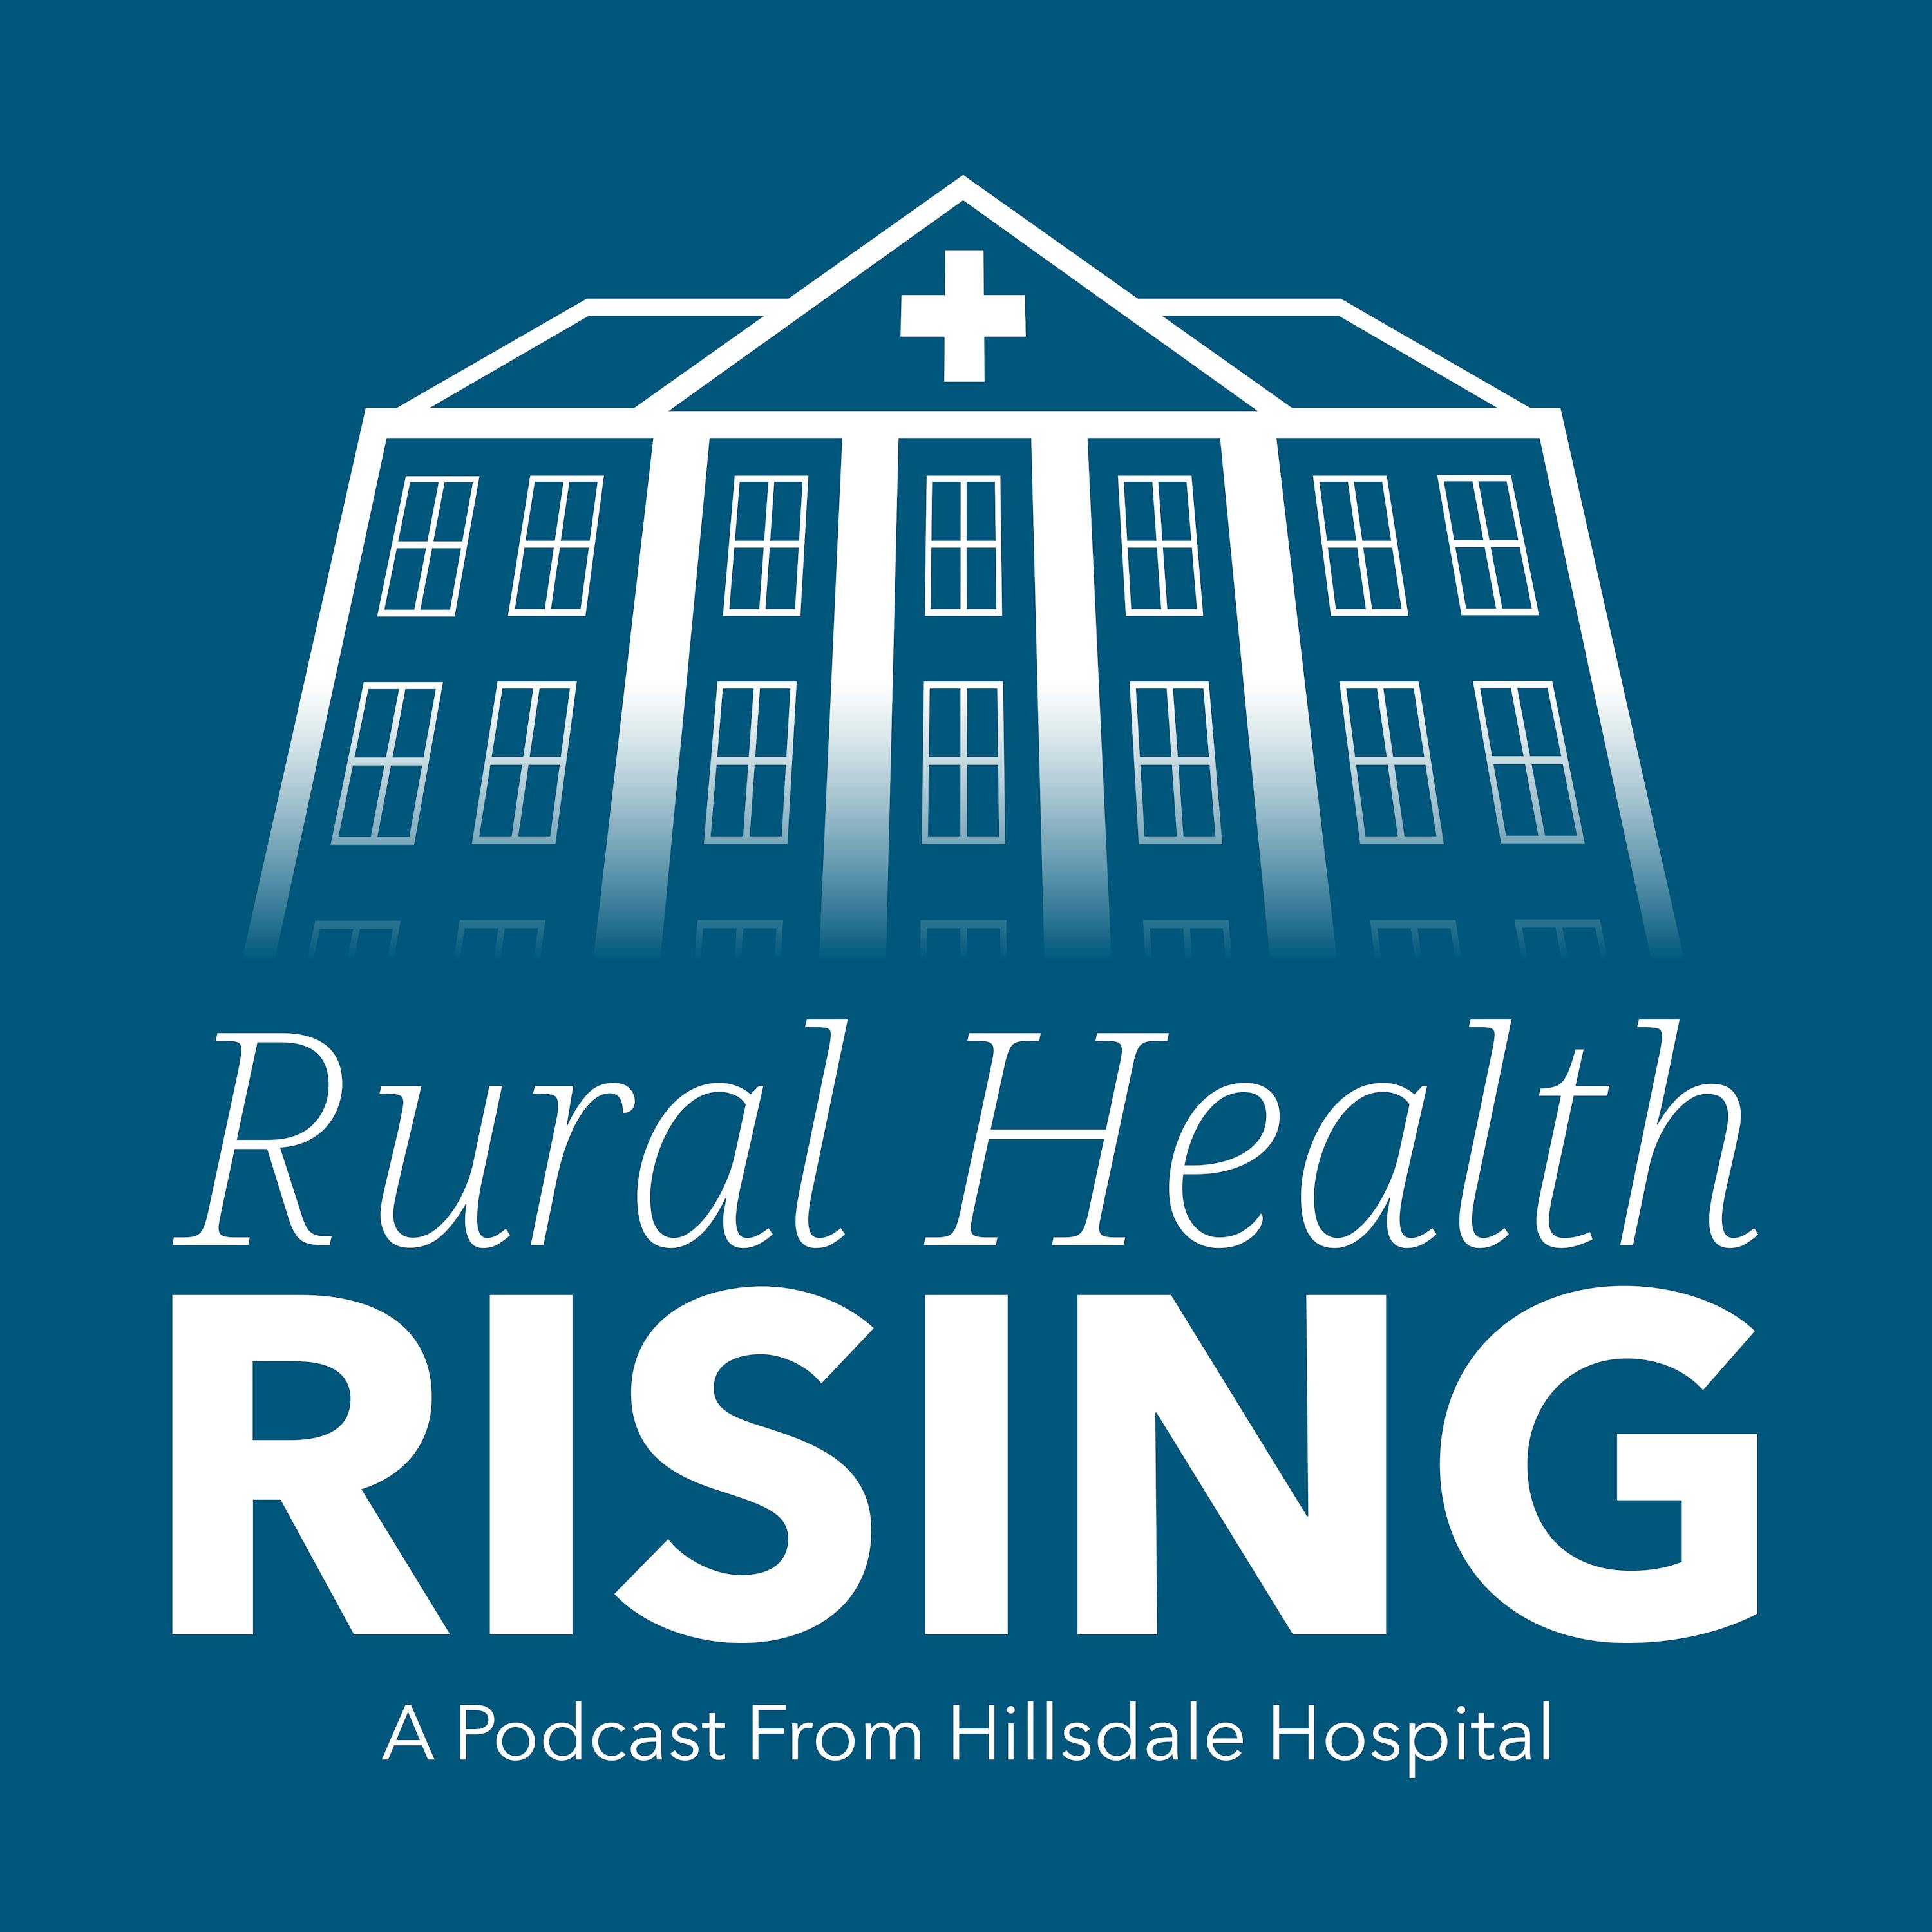 Episode 96: Radiology Services in a Rural Community